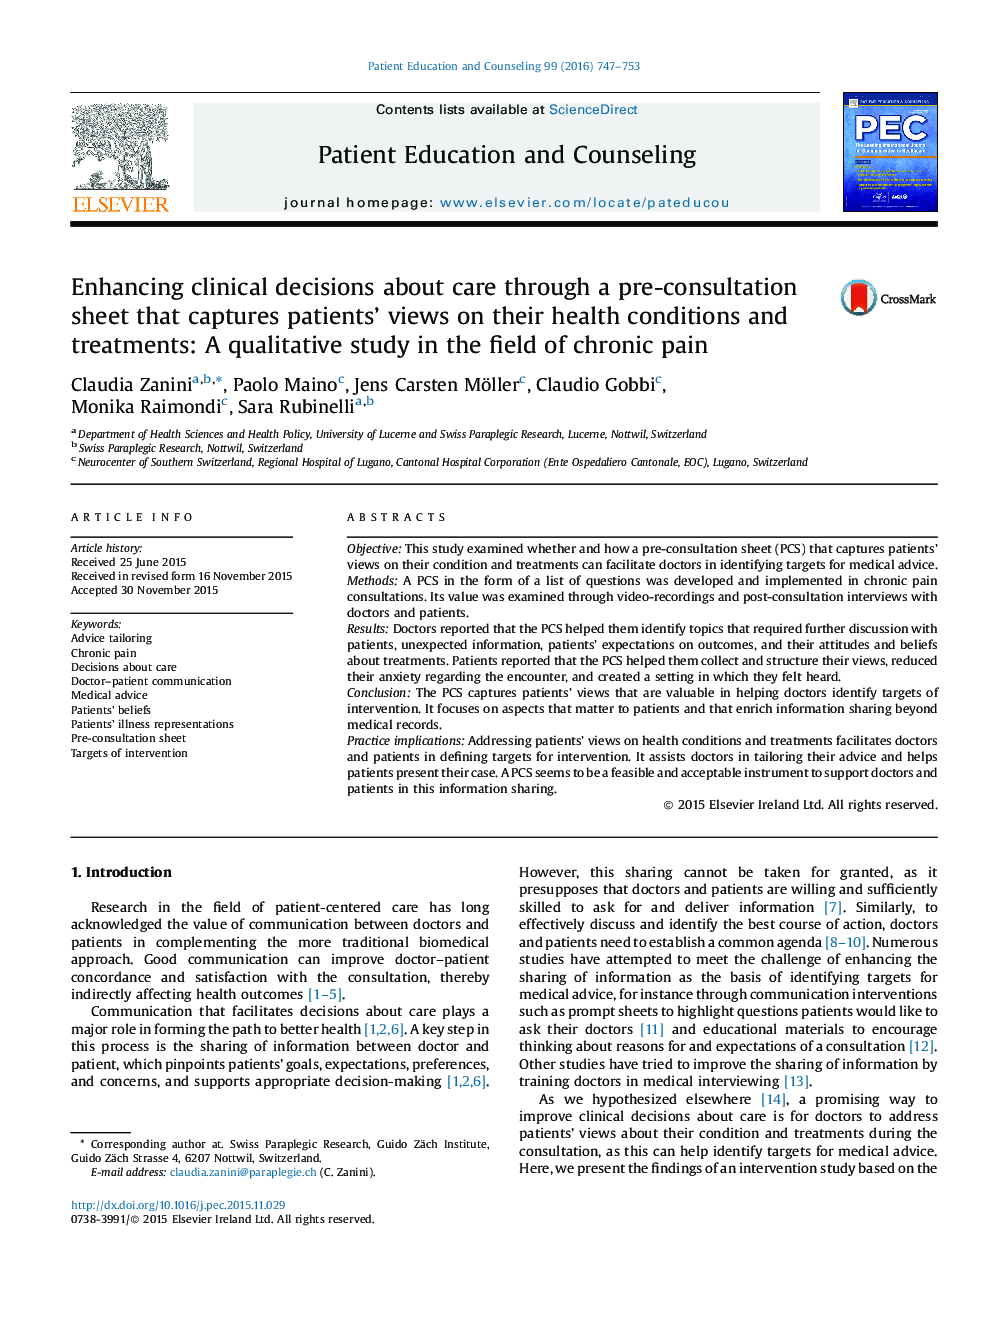 Enhancing clinical decisions about care through a pre-consultation sheet that captures patients' views on their health conditions and treatments: A qualitative study in the field of chronic pain